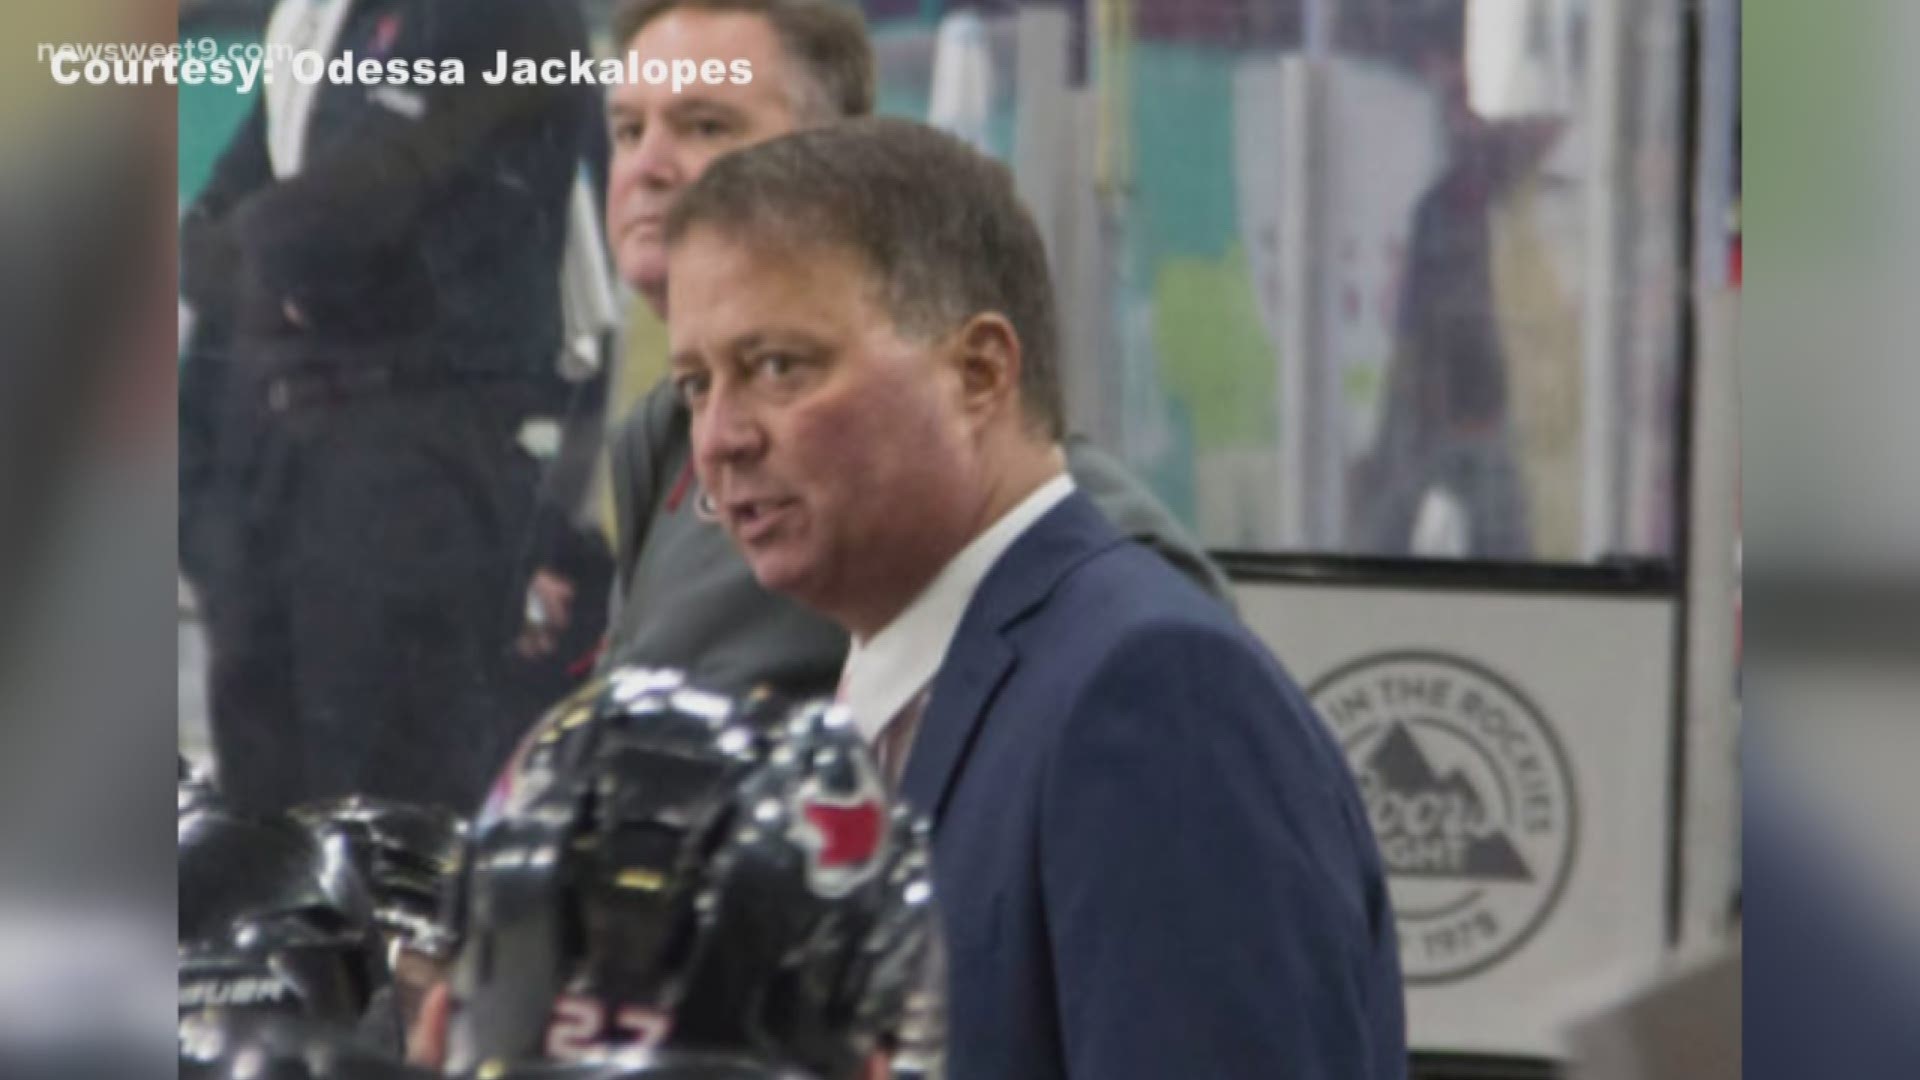 Odessa Jackalopes, NAHL, announce new interim head coach and general manager